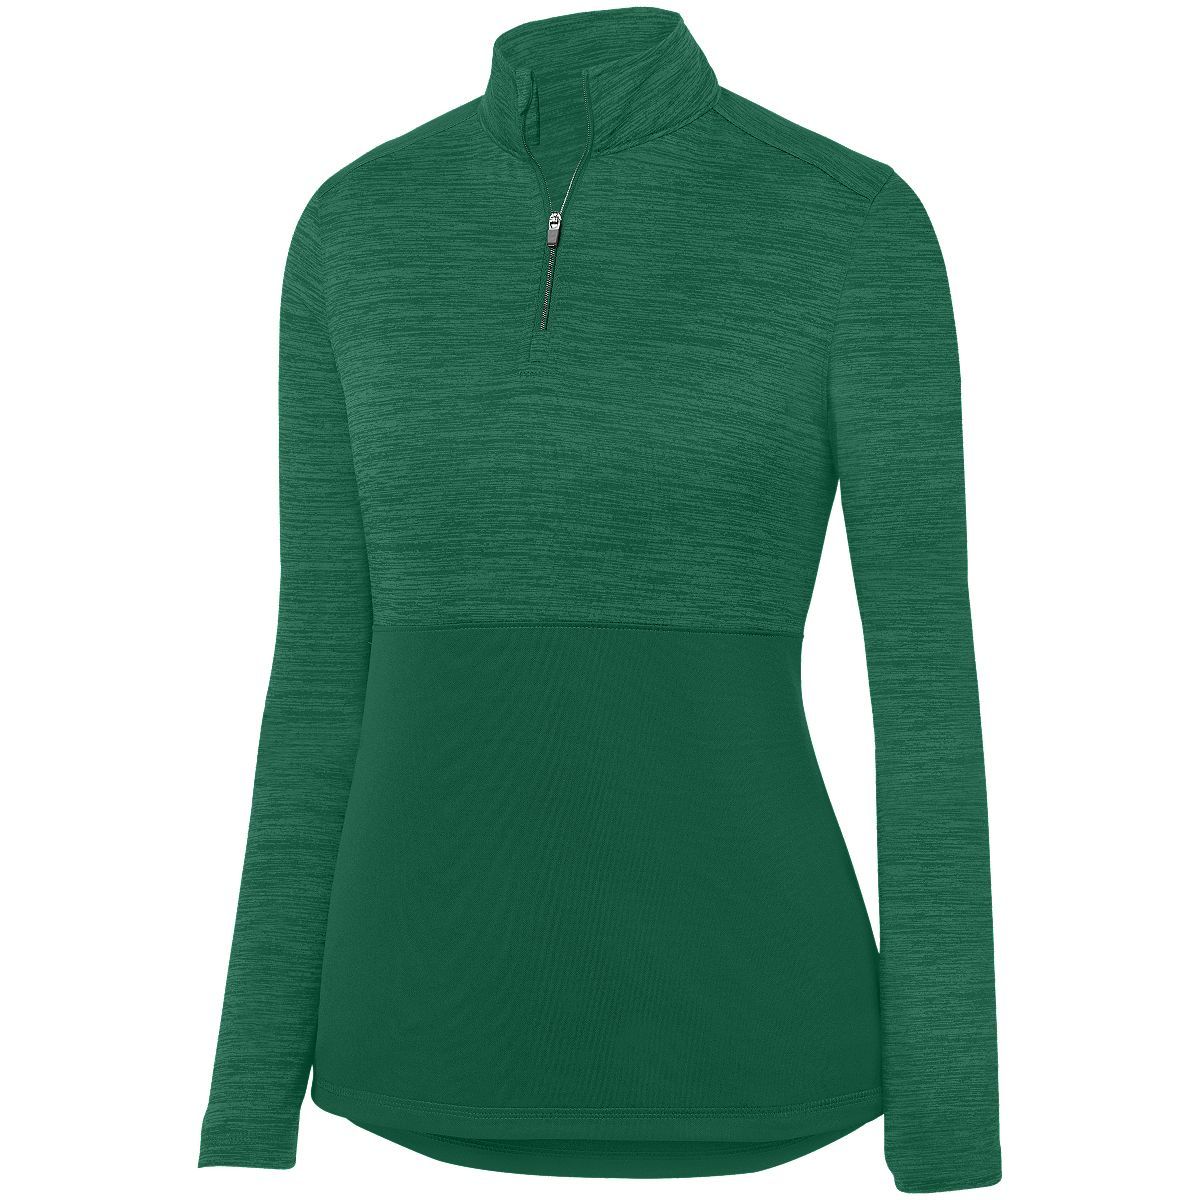 Augusta Sportswear Ladies Shadow Tonal Heather 1/4 Zip Pullover in Dark Green  -Part of the Ladies, Ladies-Pullover, Augusta-Products, Outerwear, Tonal-Fleece-Collection product lines at KanaleyCreations.com